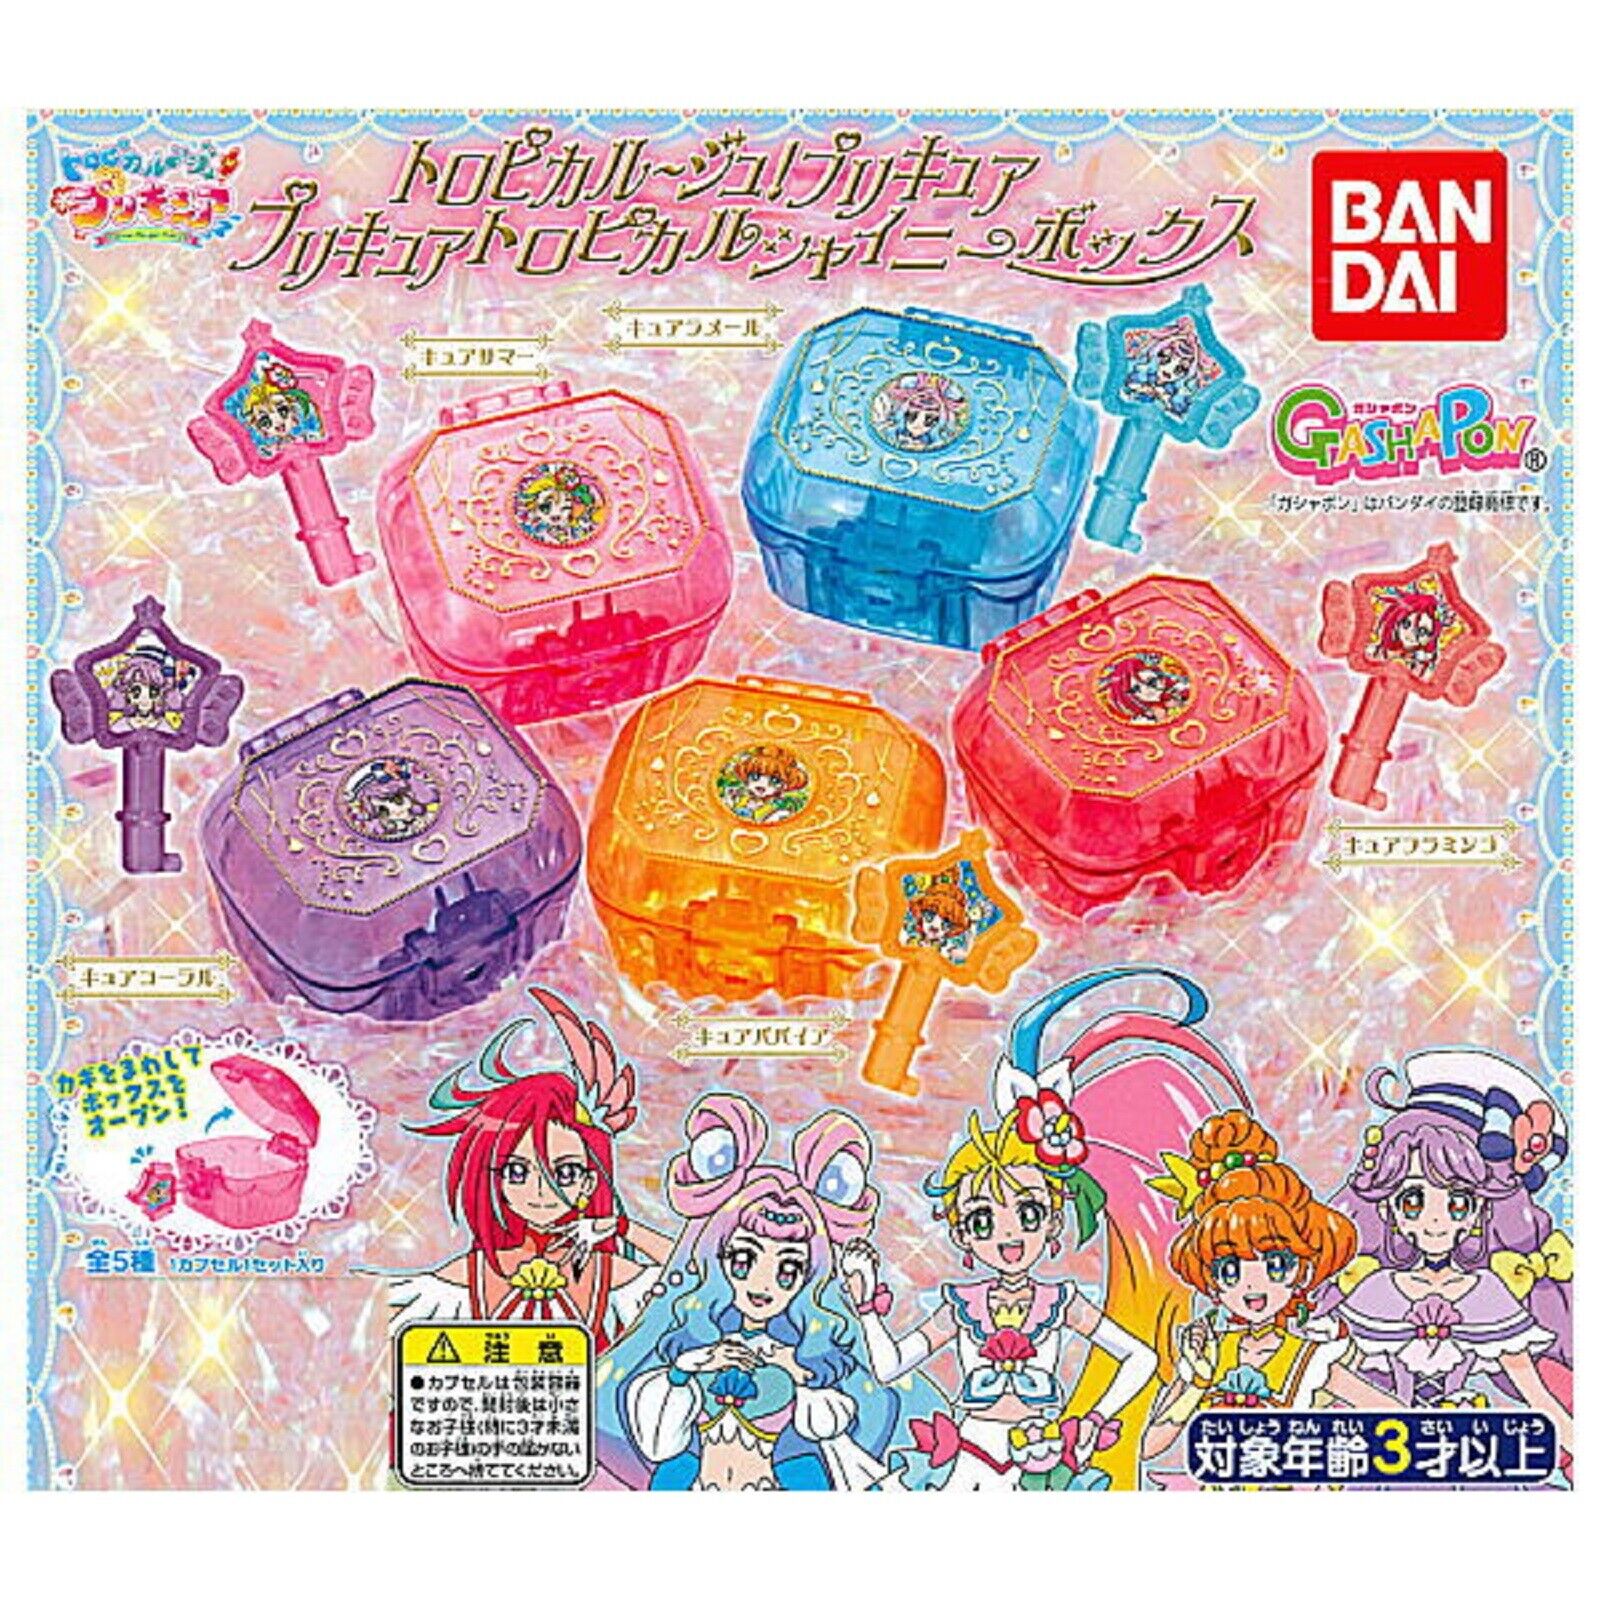 Tropical-Rouge PreCure PreCure Tropical Shiny Box Capsule Toy 5 Types Set Comp